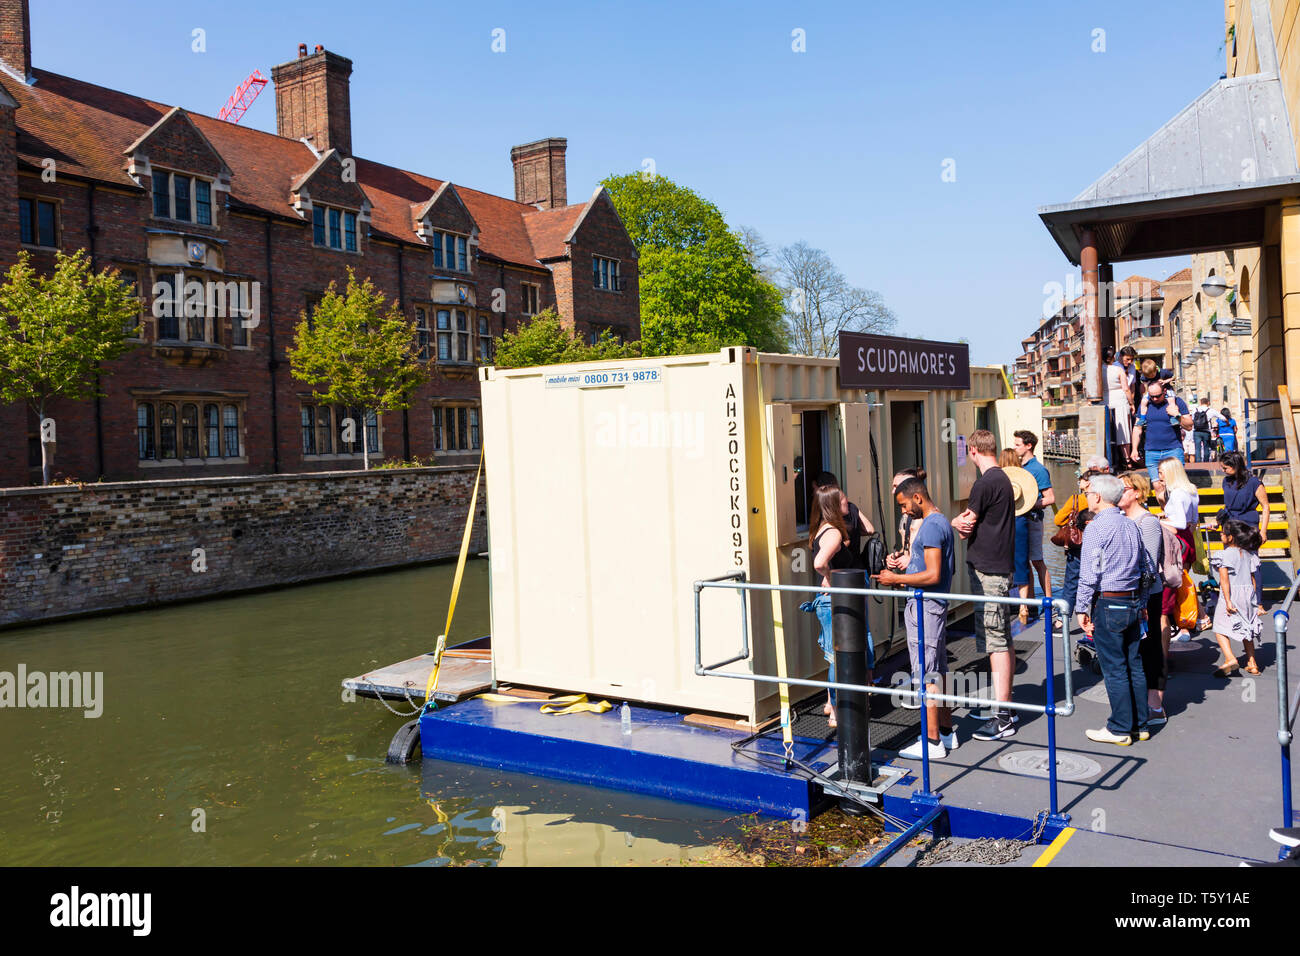 Tourists queue for tickets to punts at Scudamores quay on the River Cam, University town of Cambridge, Cambridgeshire, England Stock Photo